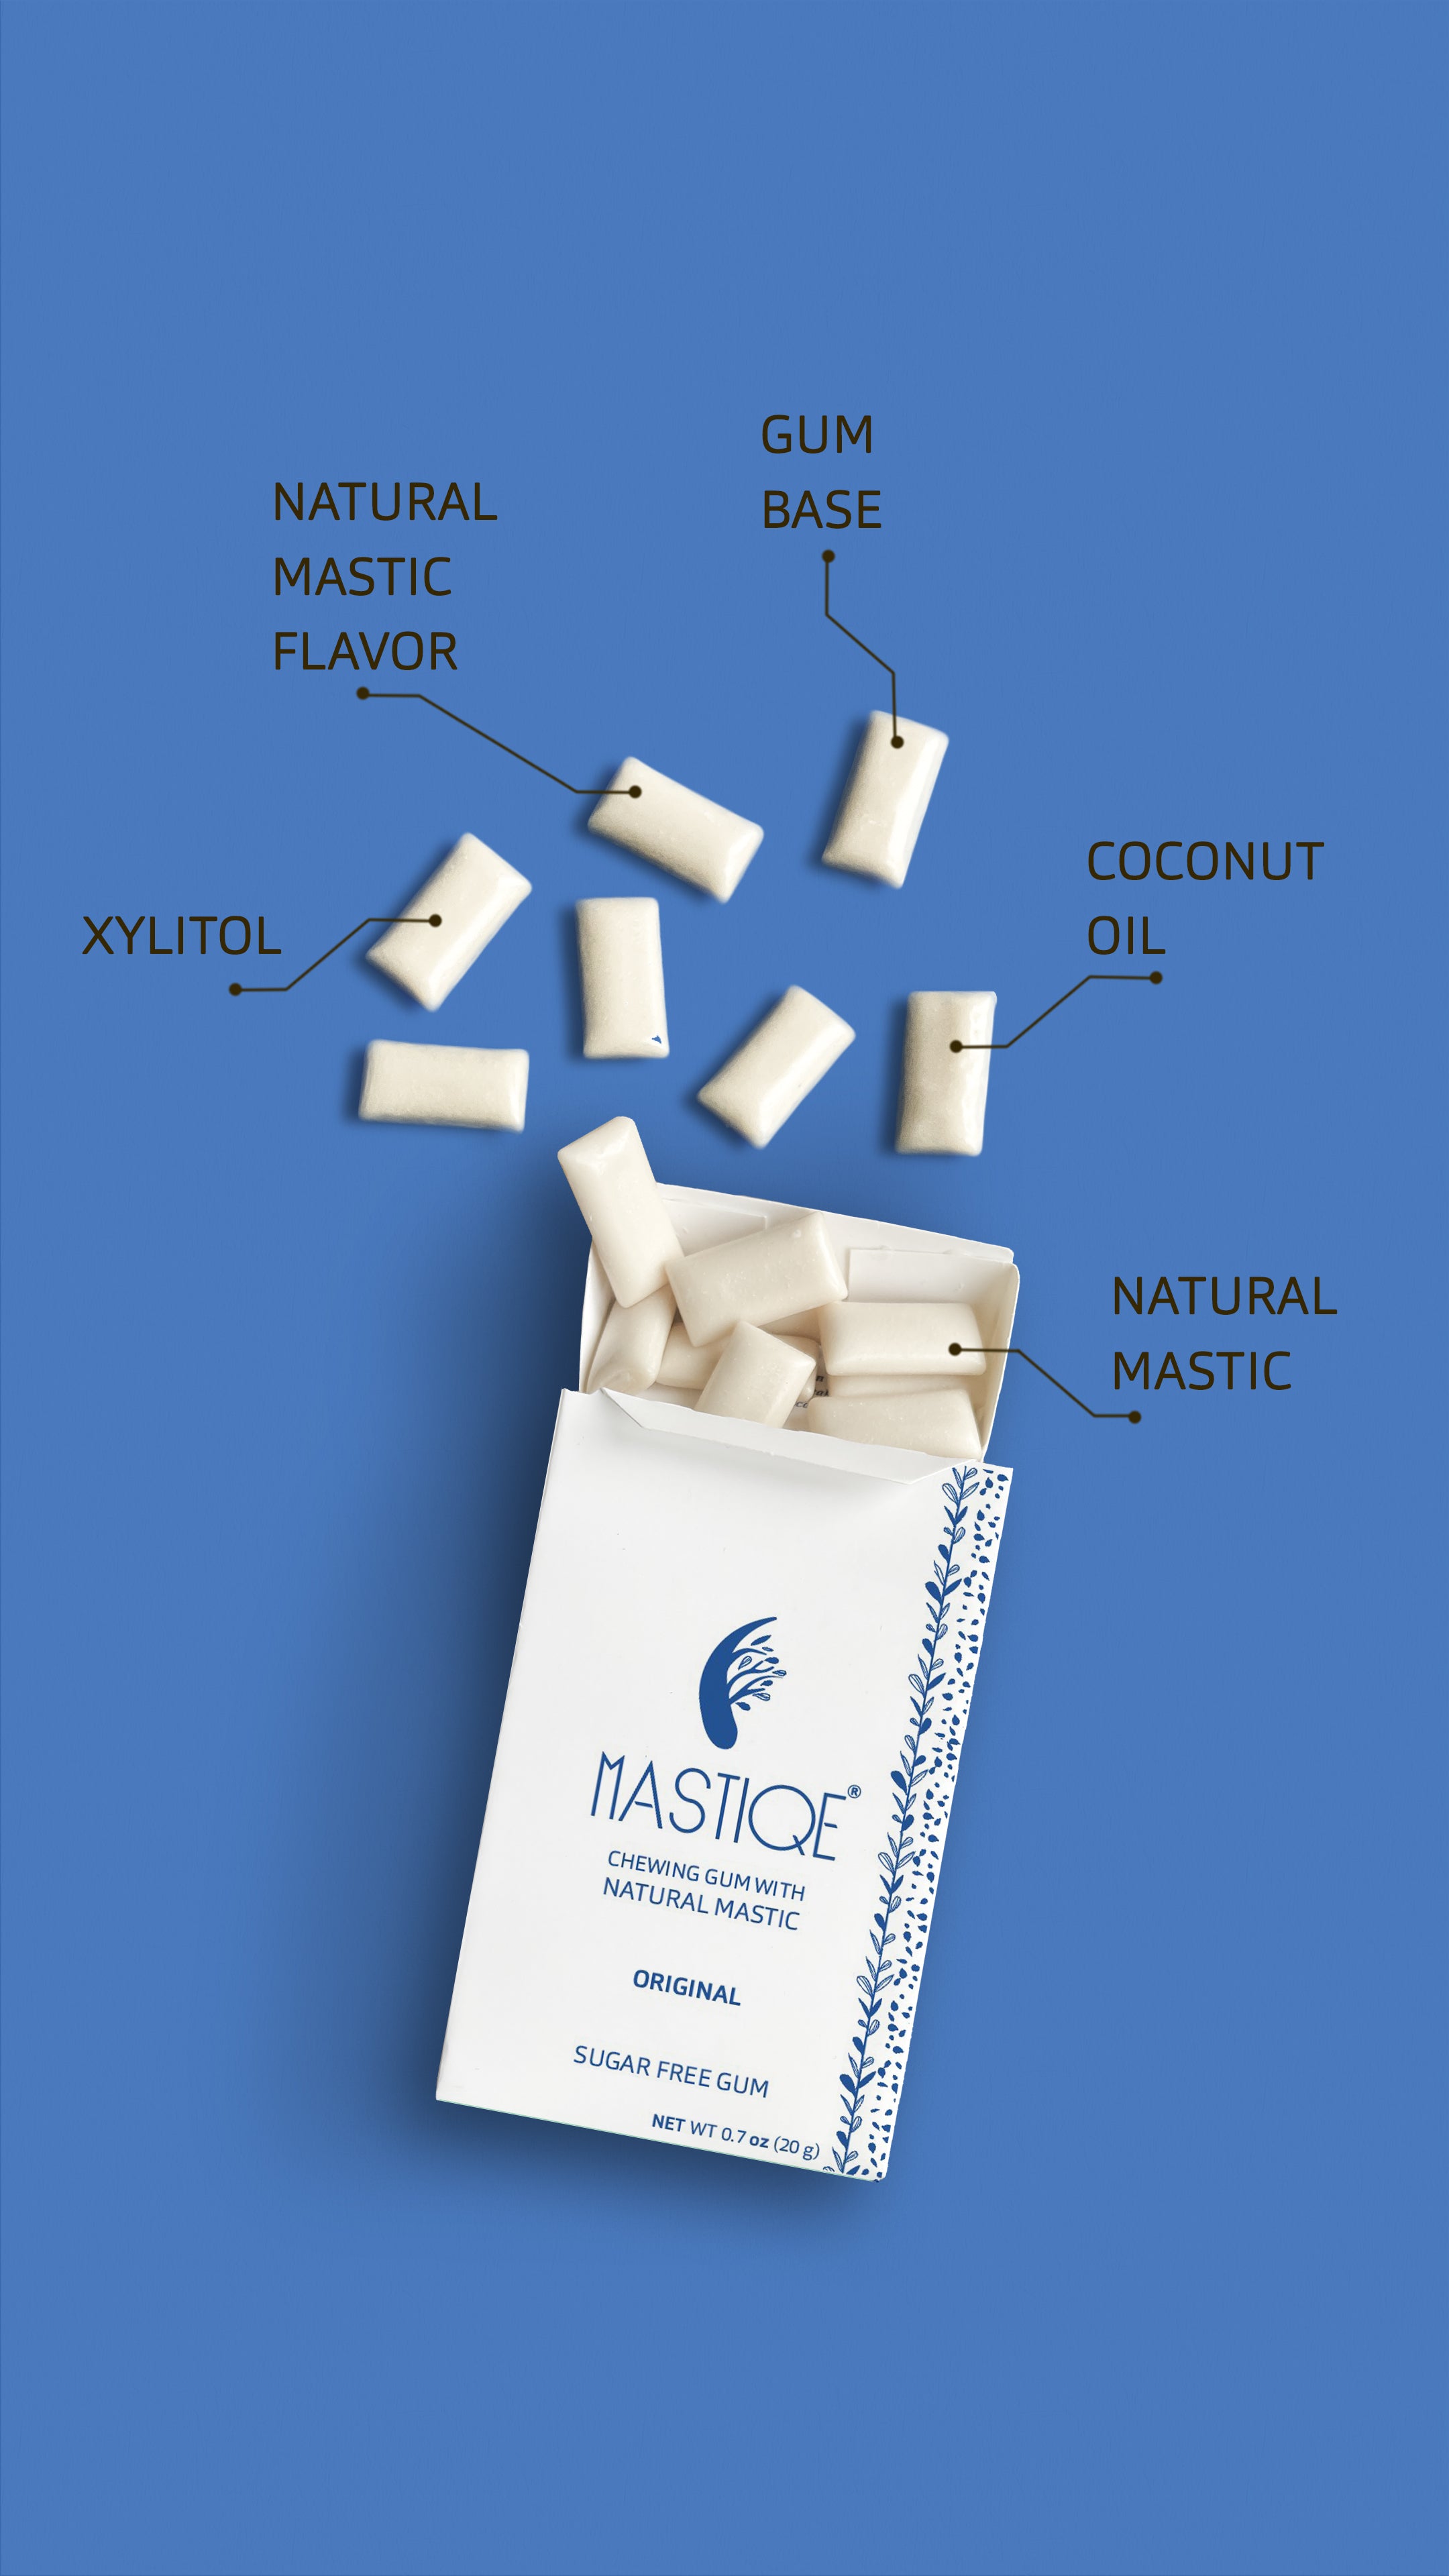 All New! Mastiqe Hard Chewing Gum with Natural Mastic, Original (20-Pack)